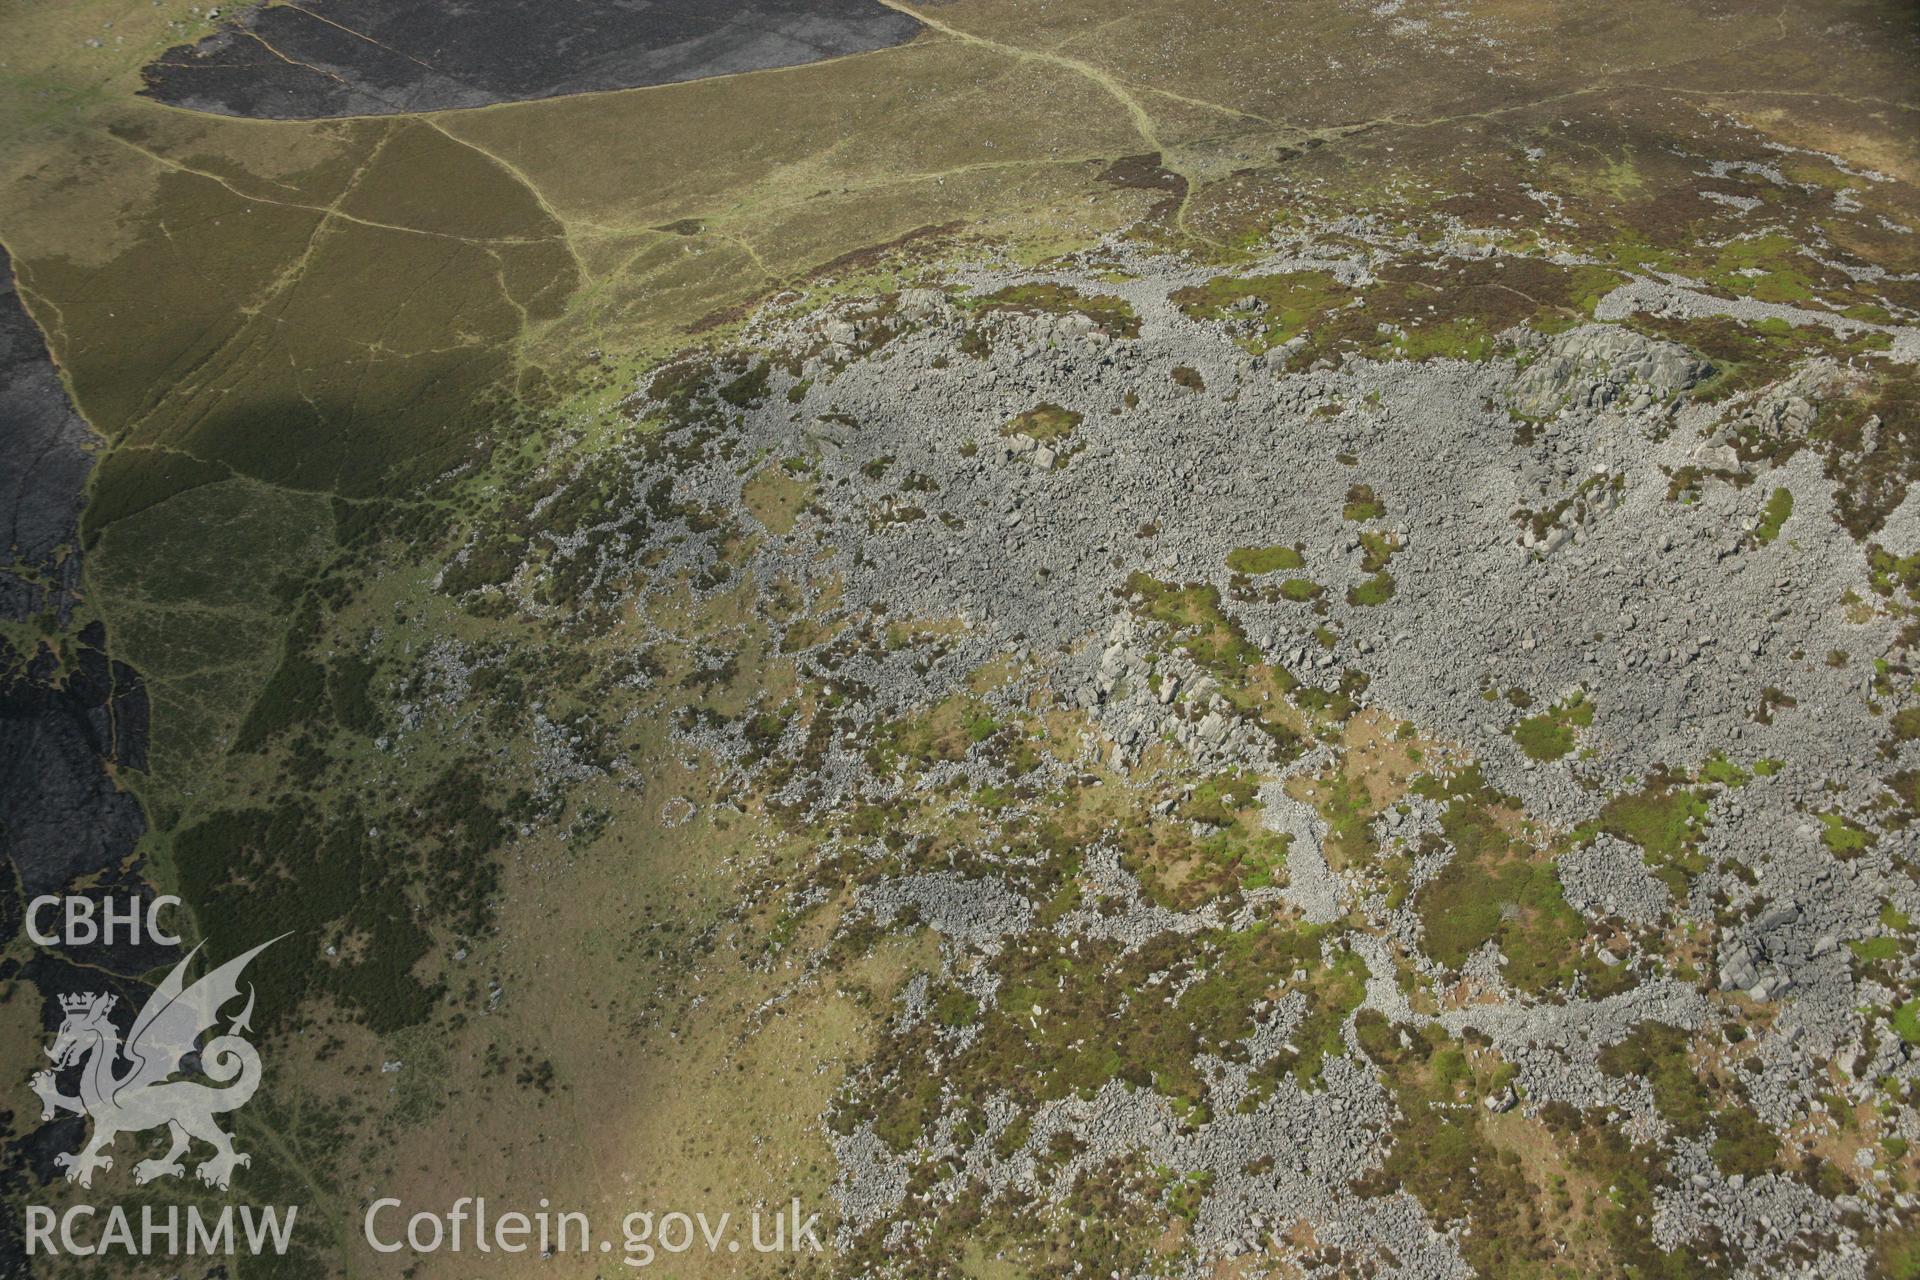 RCAHMW colour oblique aerial photograph of Carn Ingli Camp. Taken on 17 April 2007 by Toby Driver